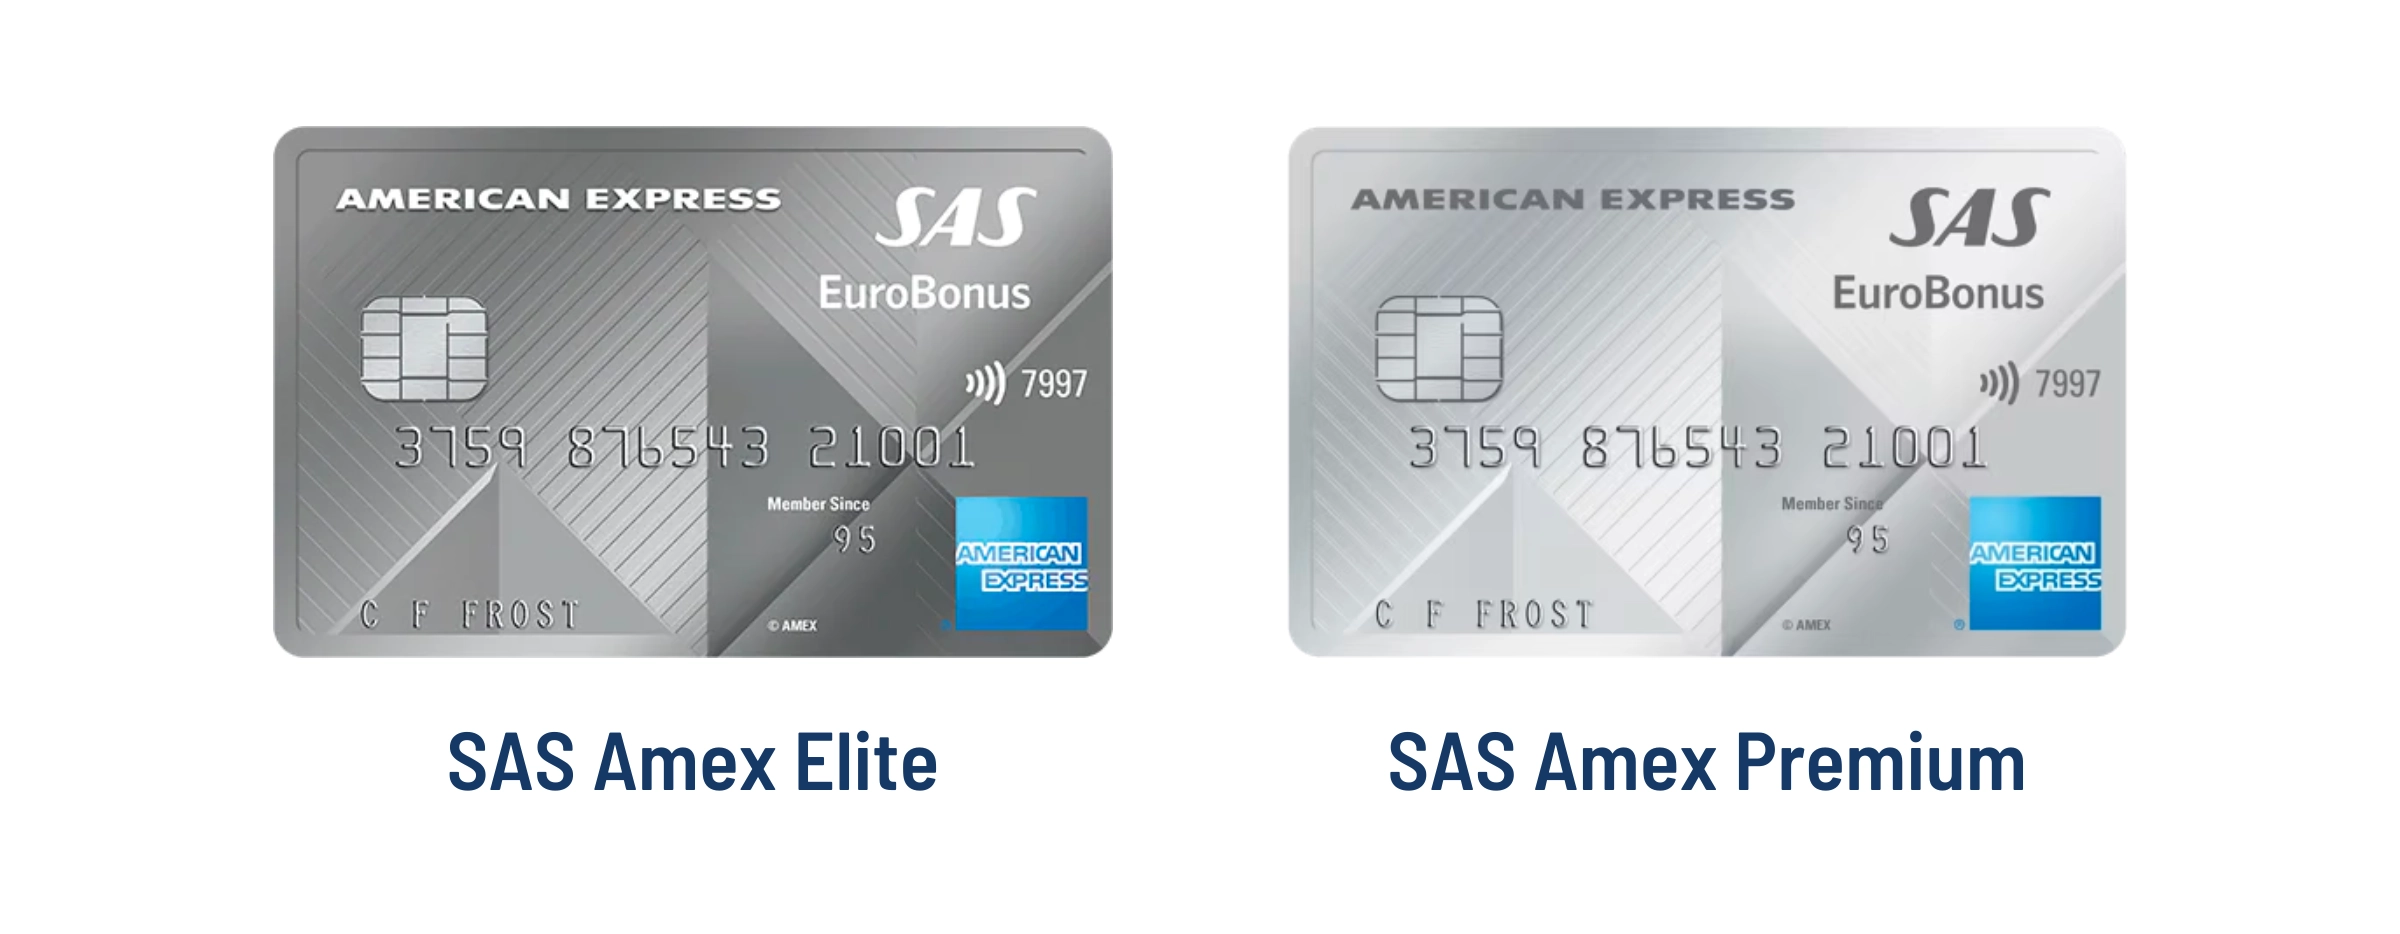 The SAS American Express Elite and Premium cards offer 2-for-1 vouchers.